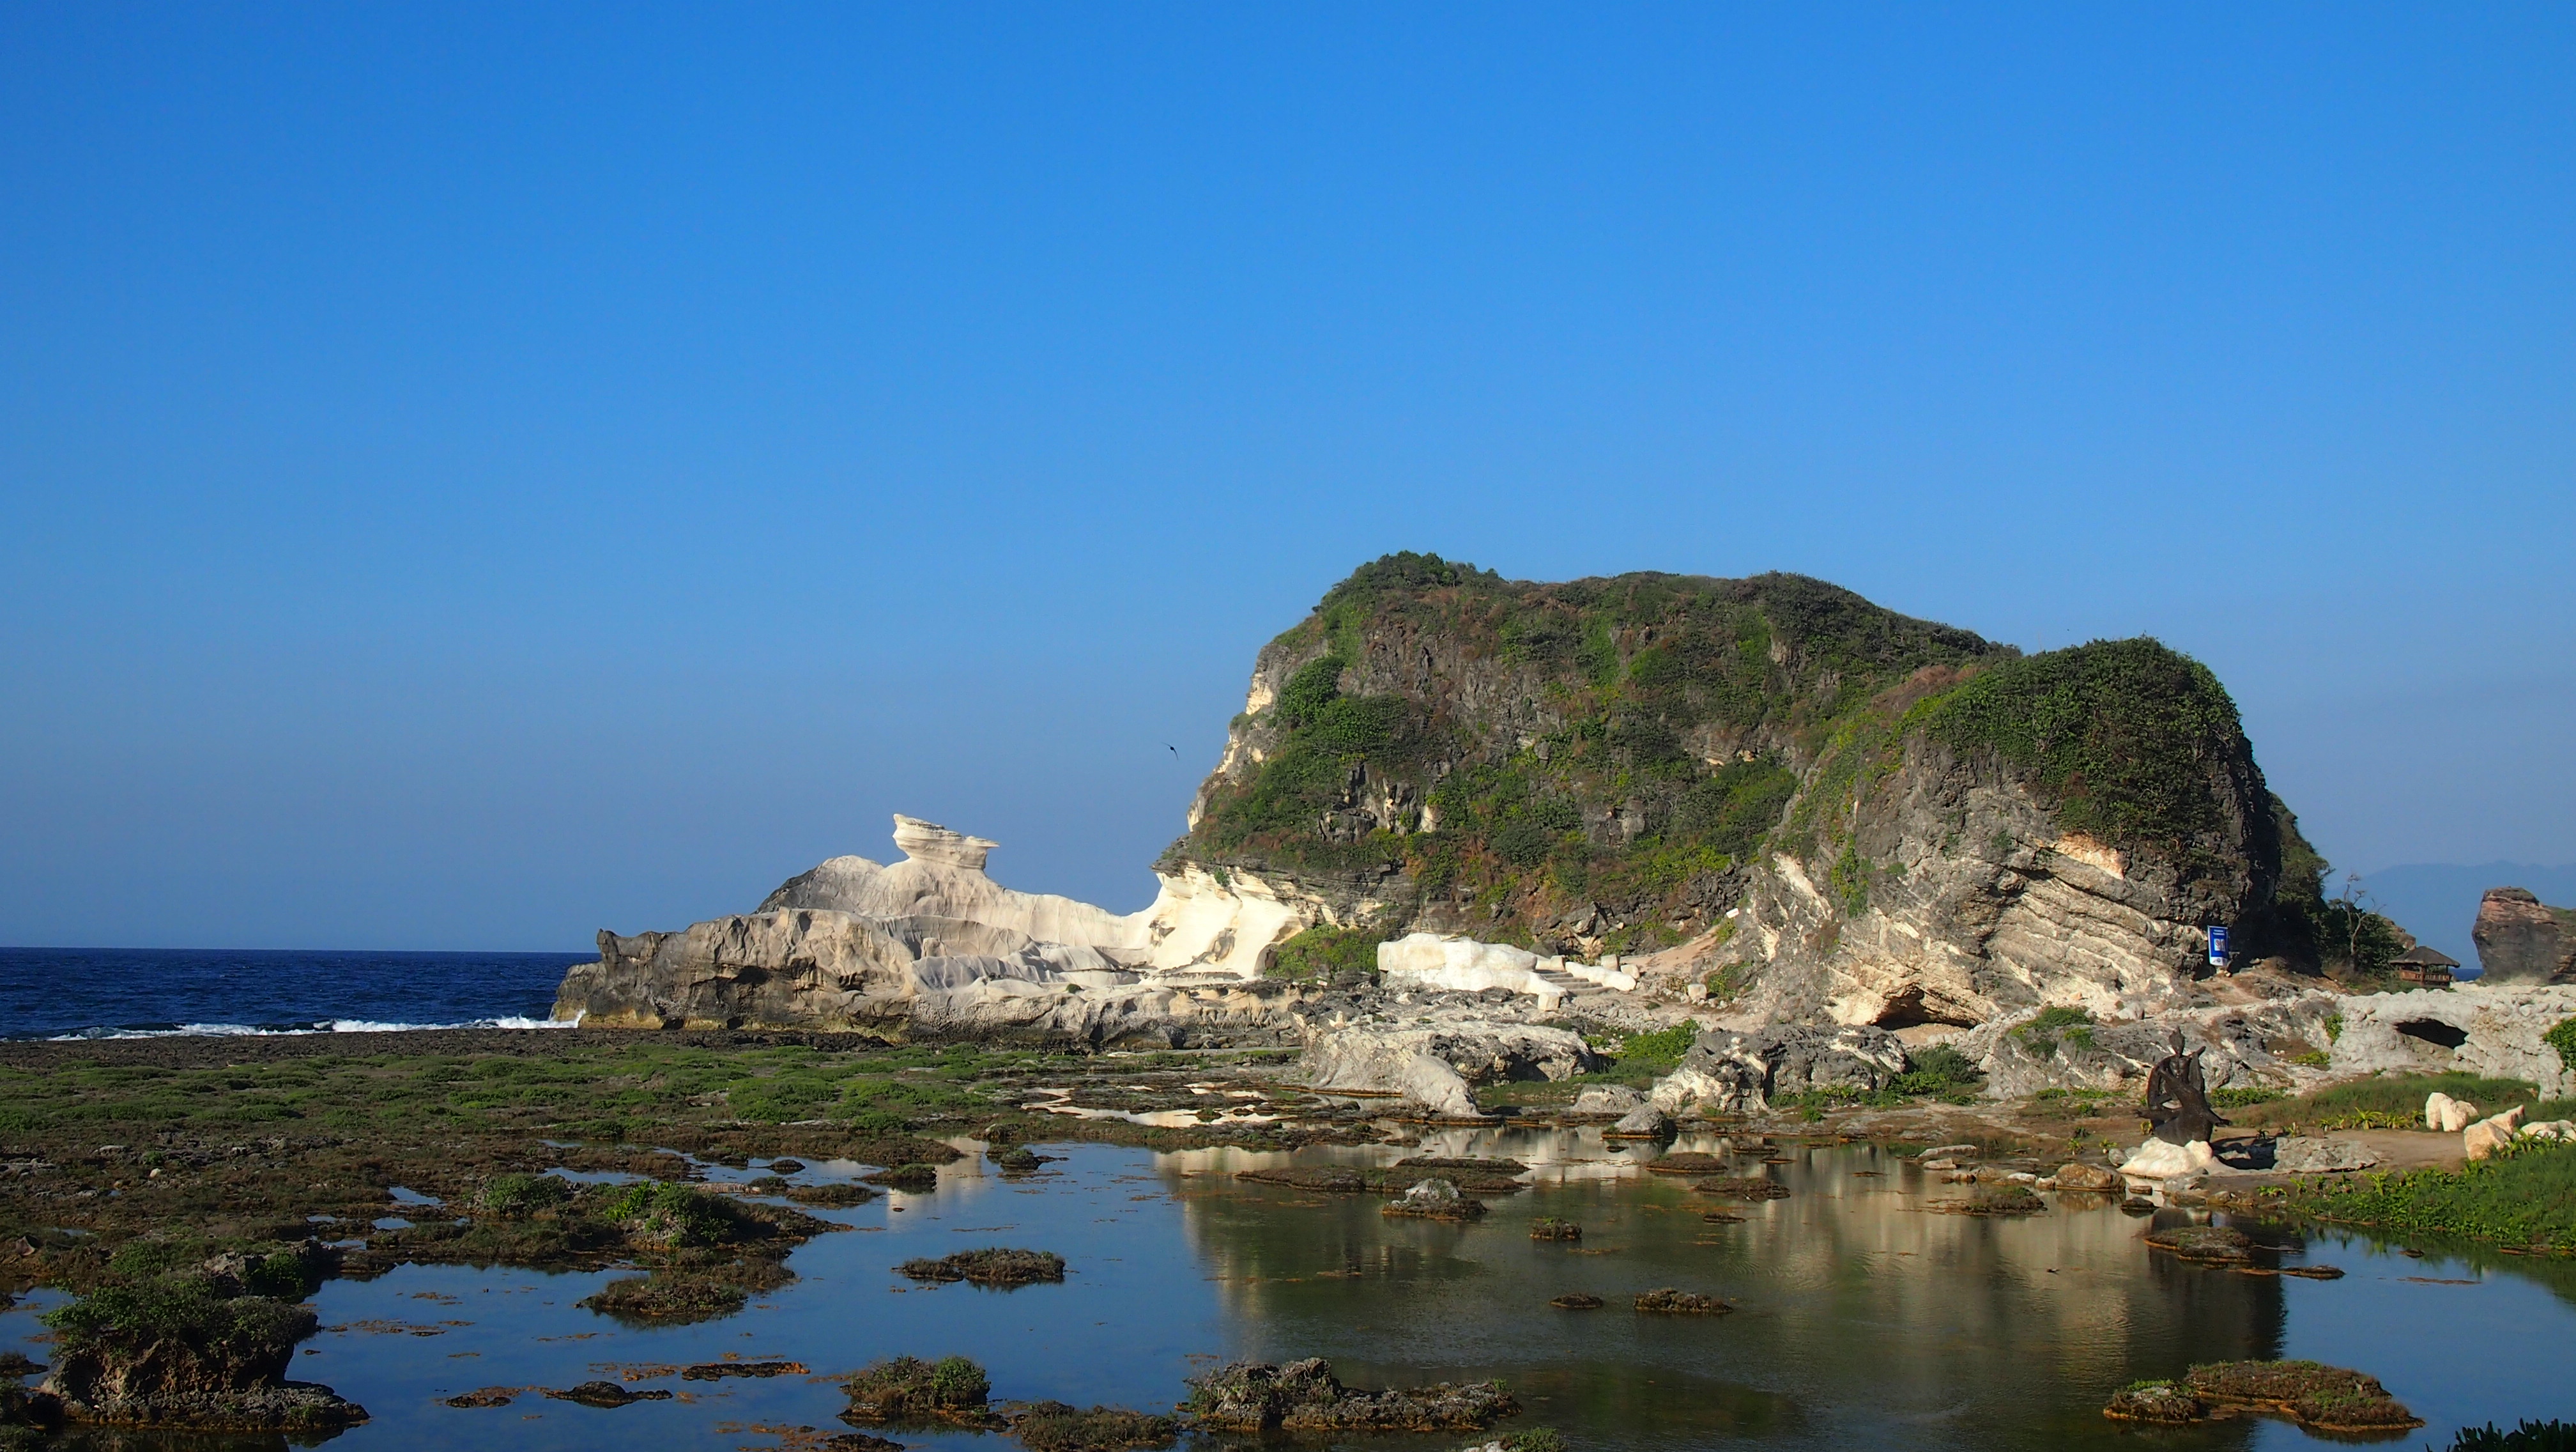 Ilocos Norte: My Second Home Province | The Maxims of Jim